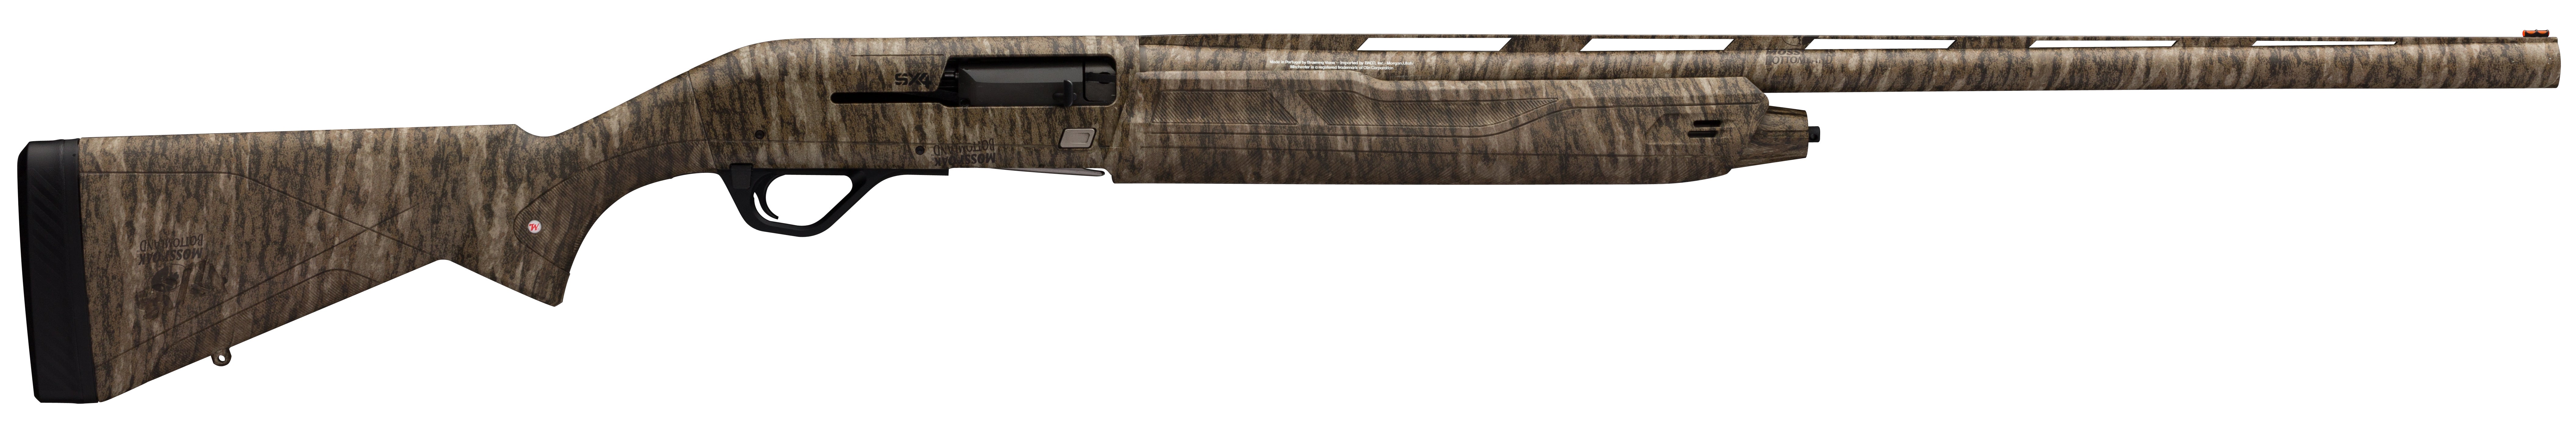 Winchester SX4 Waterfowl MOBL - 511212292